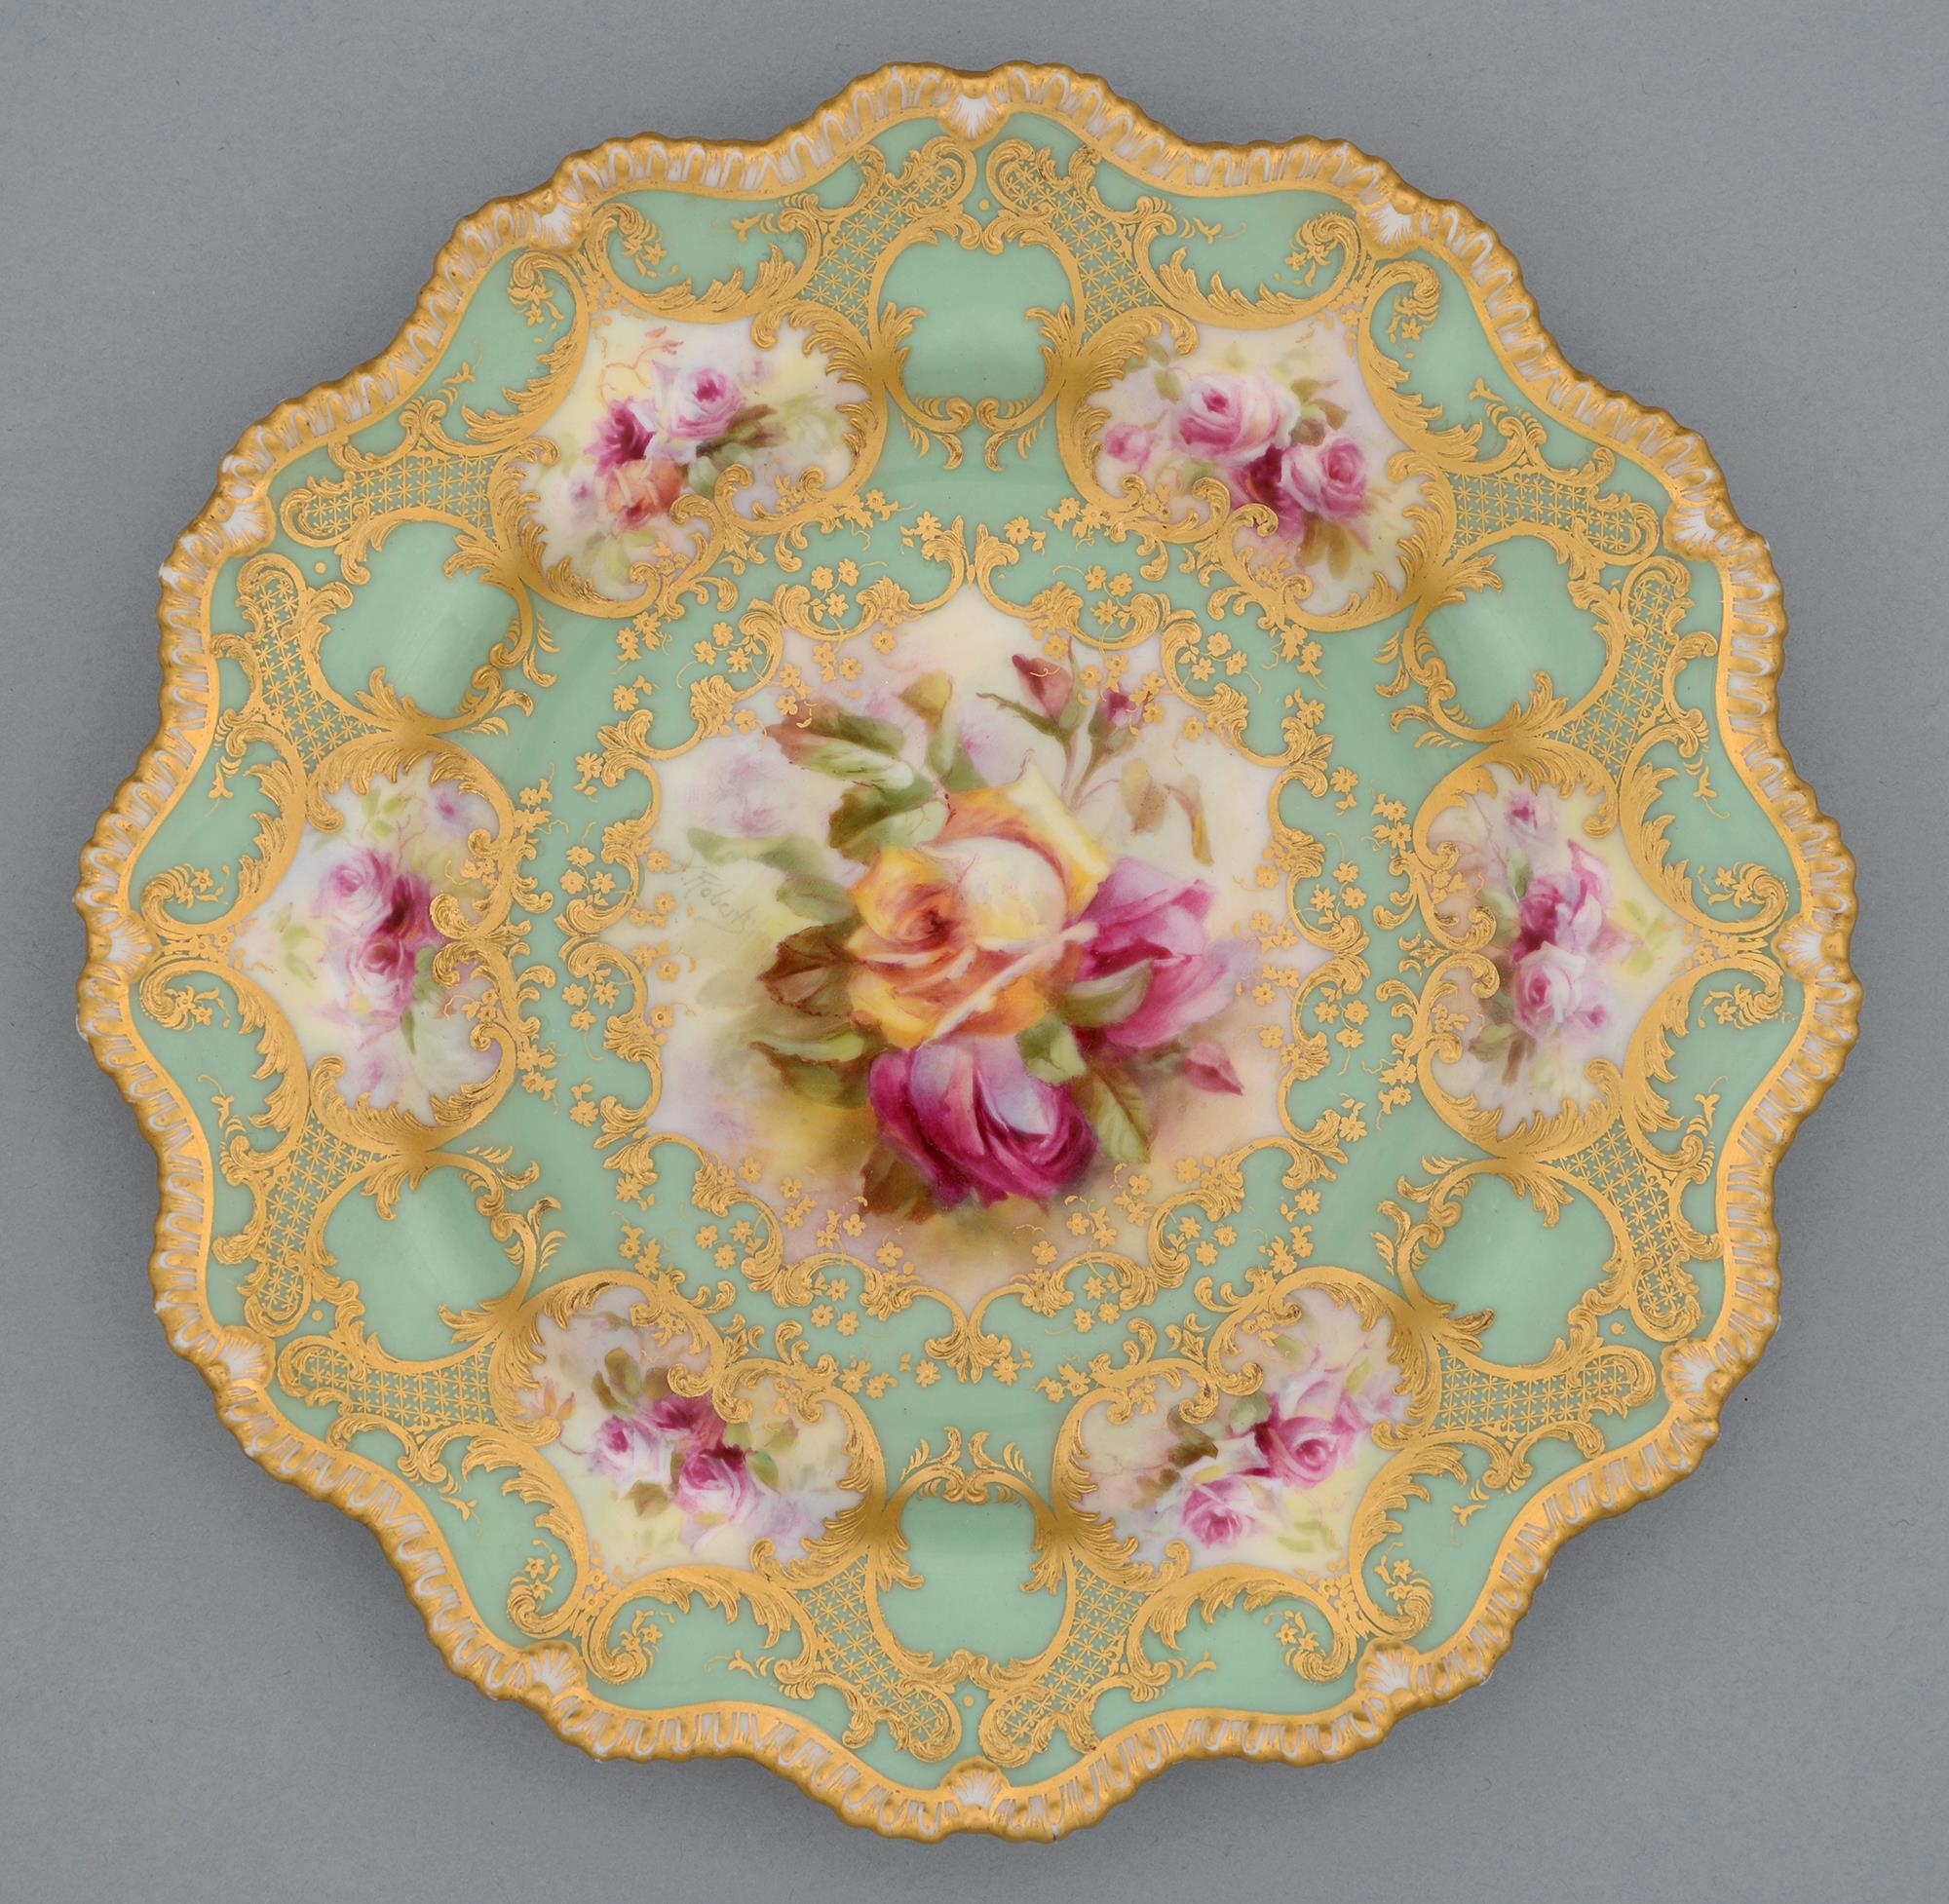 A Royal Worcester plate, c1917, painted by Roberts, signed, with two or three pink and yellow